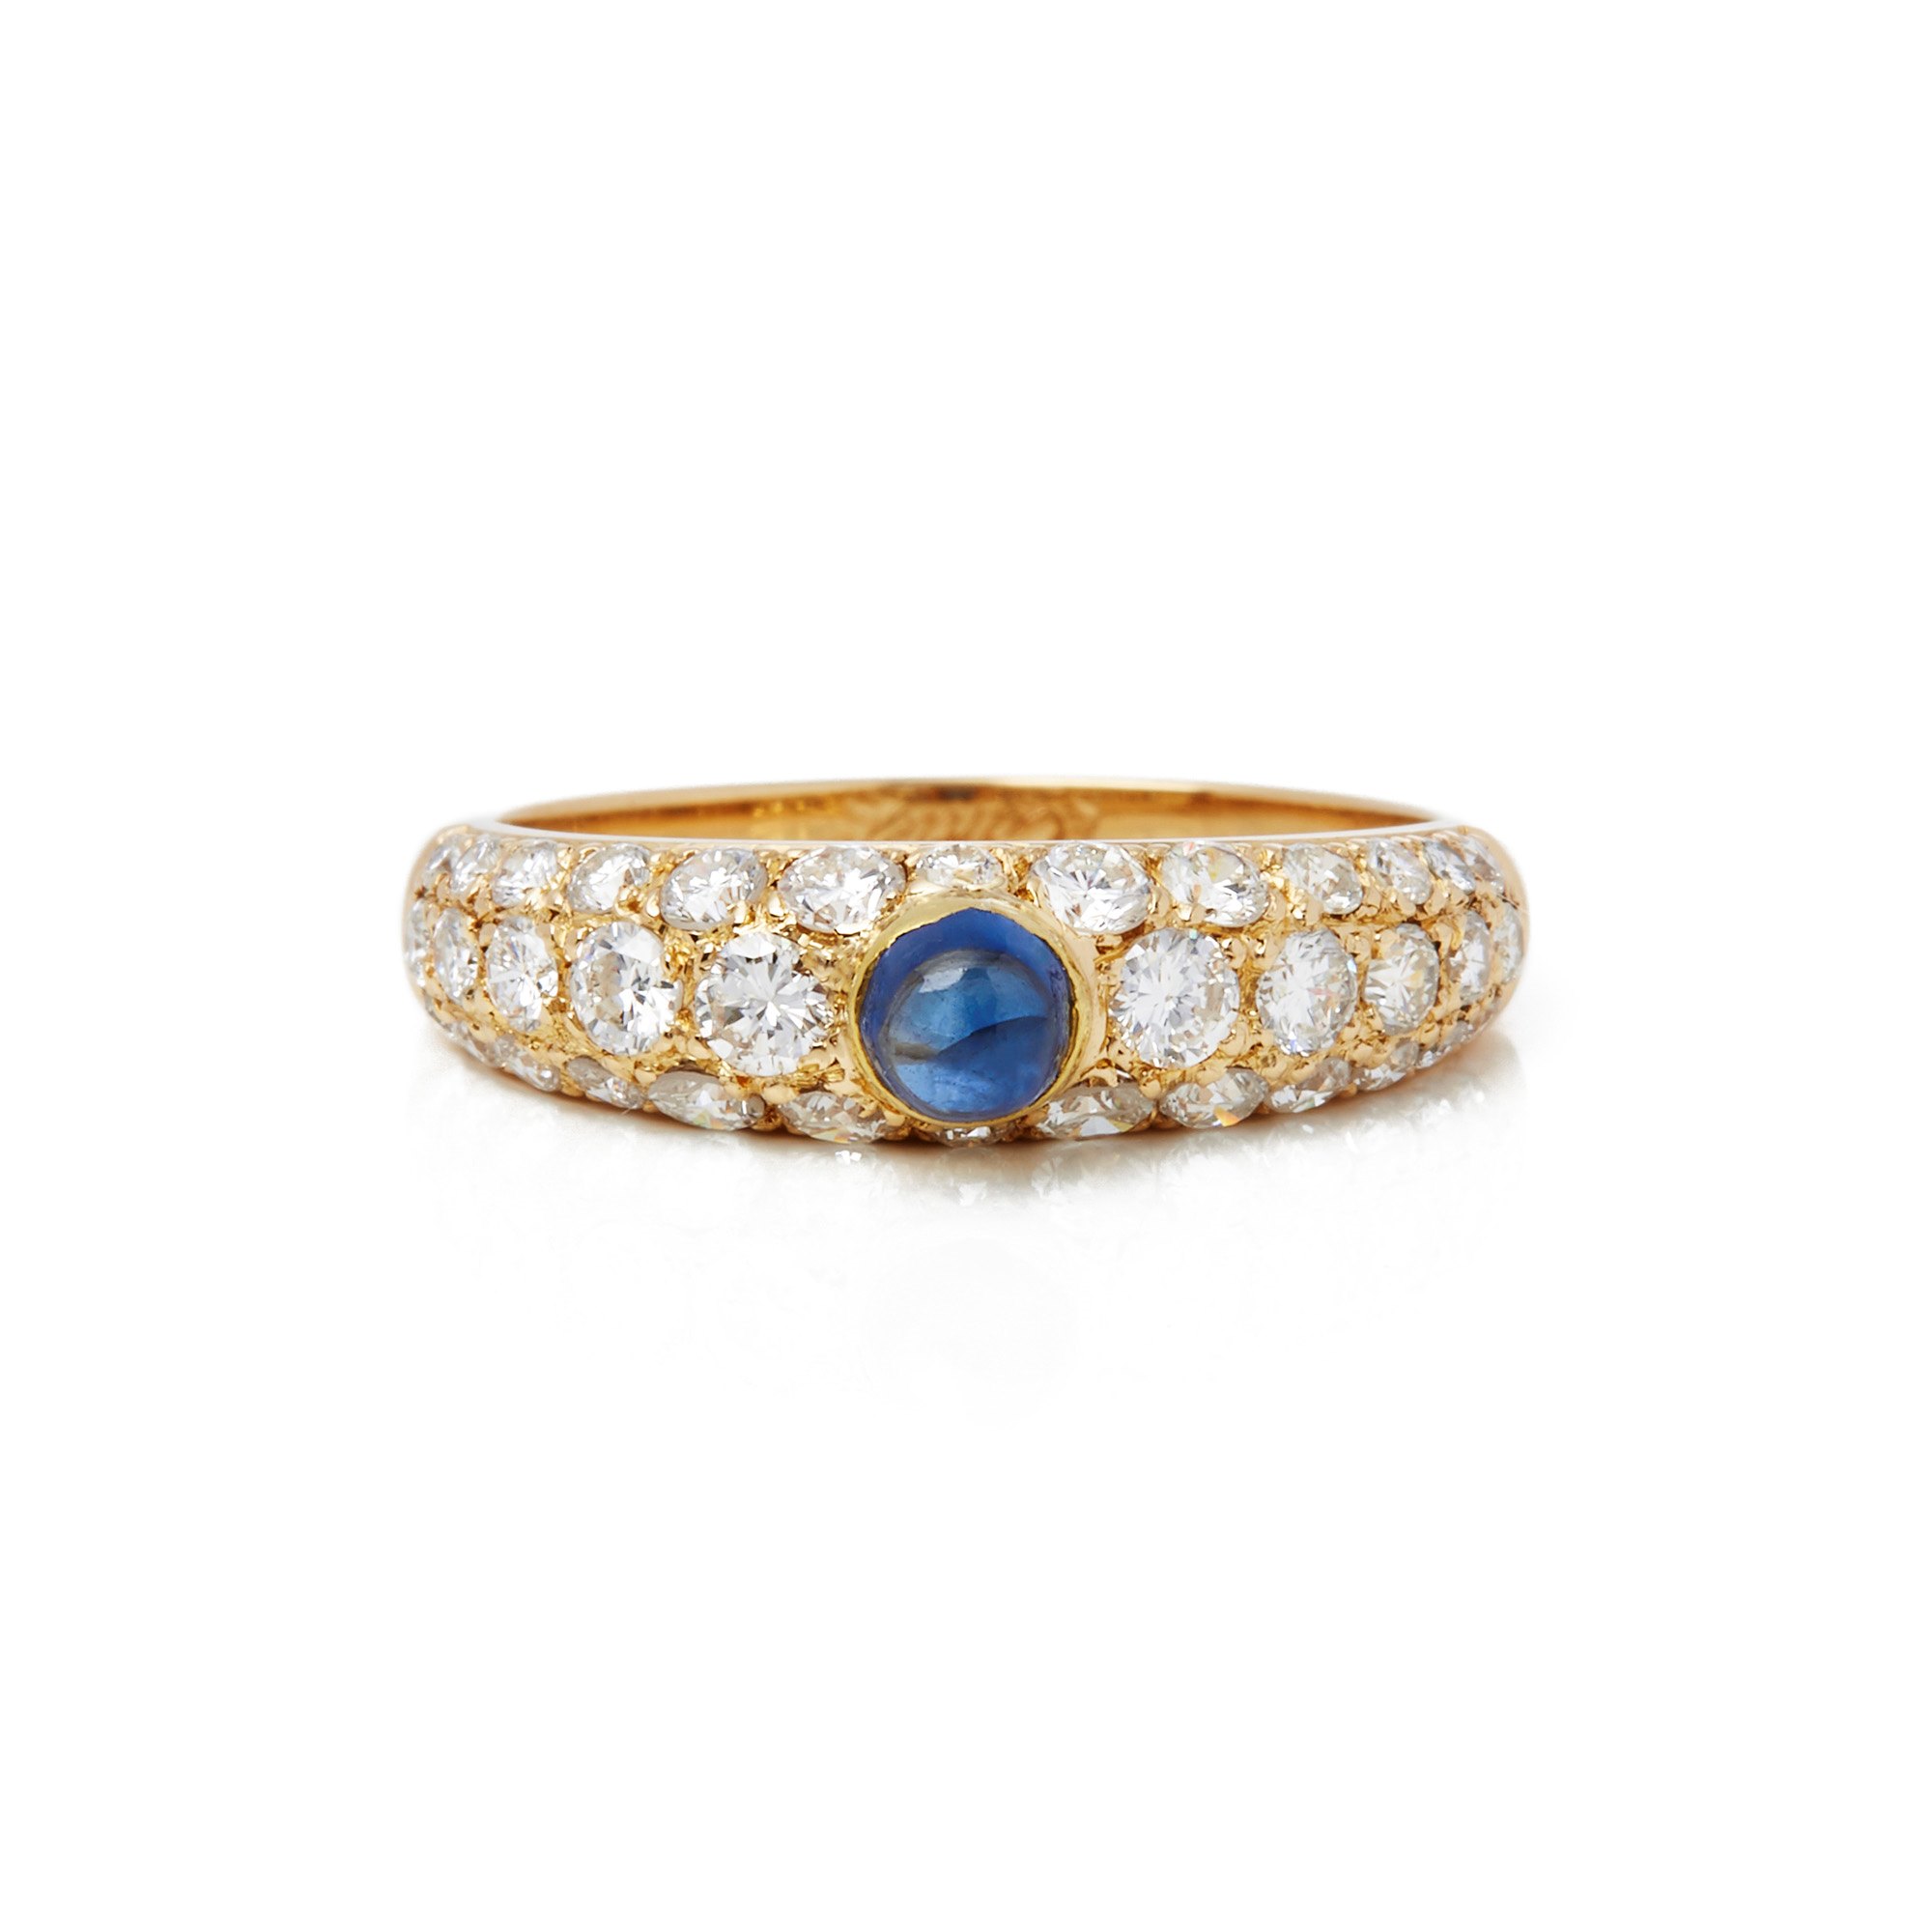 Cartier 18k Yellow Gold Cabochon Sapphire and Diamond Ring